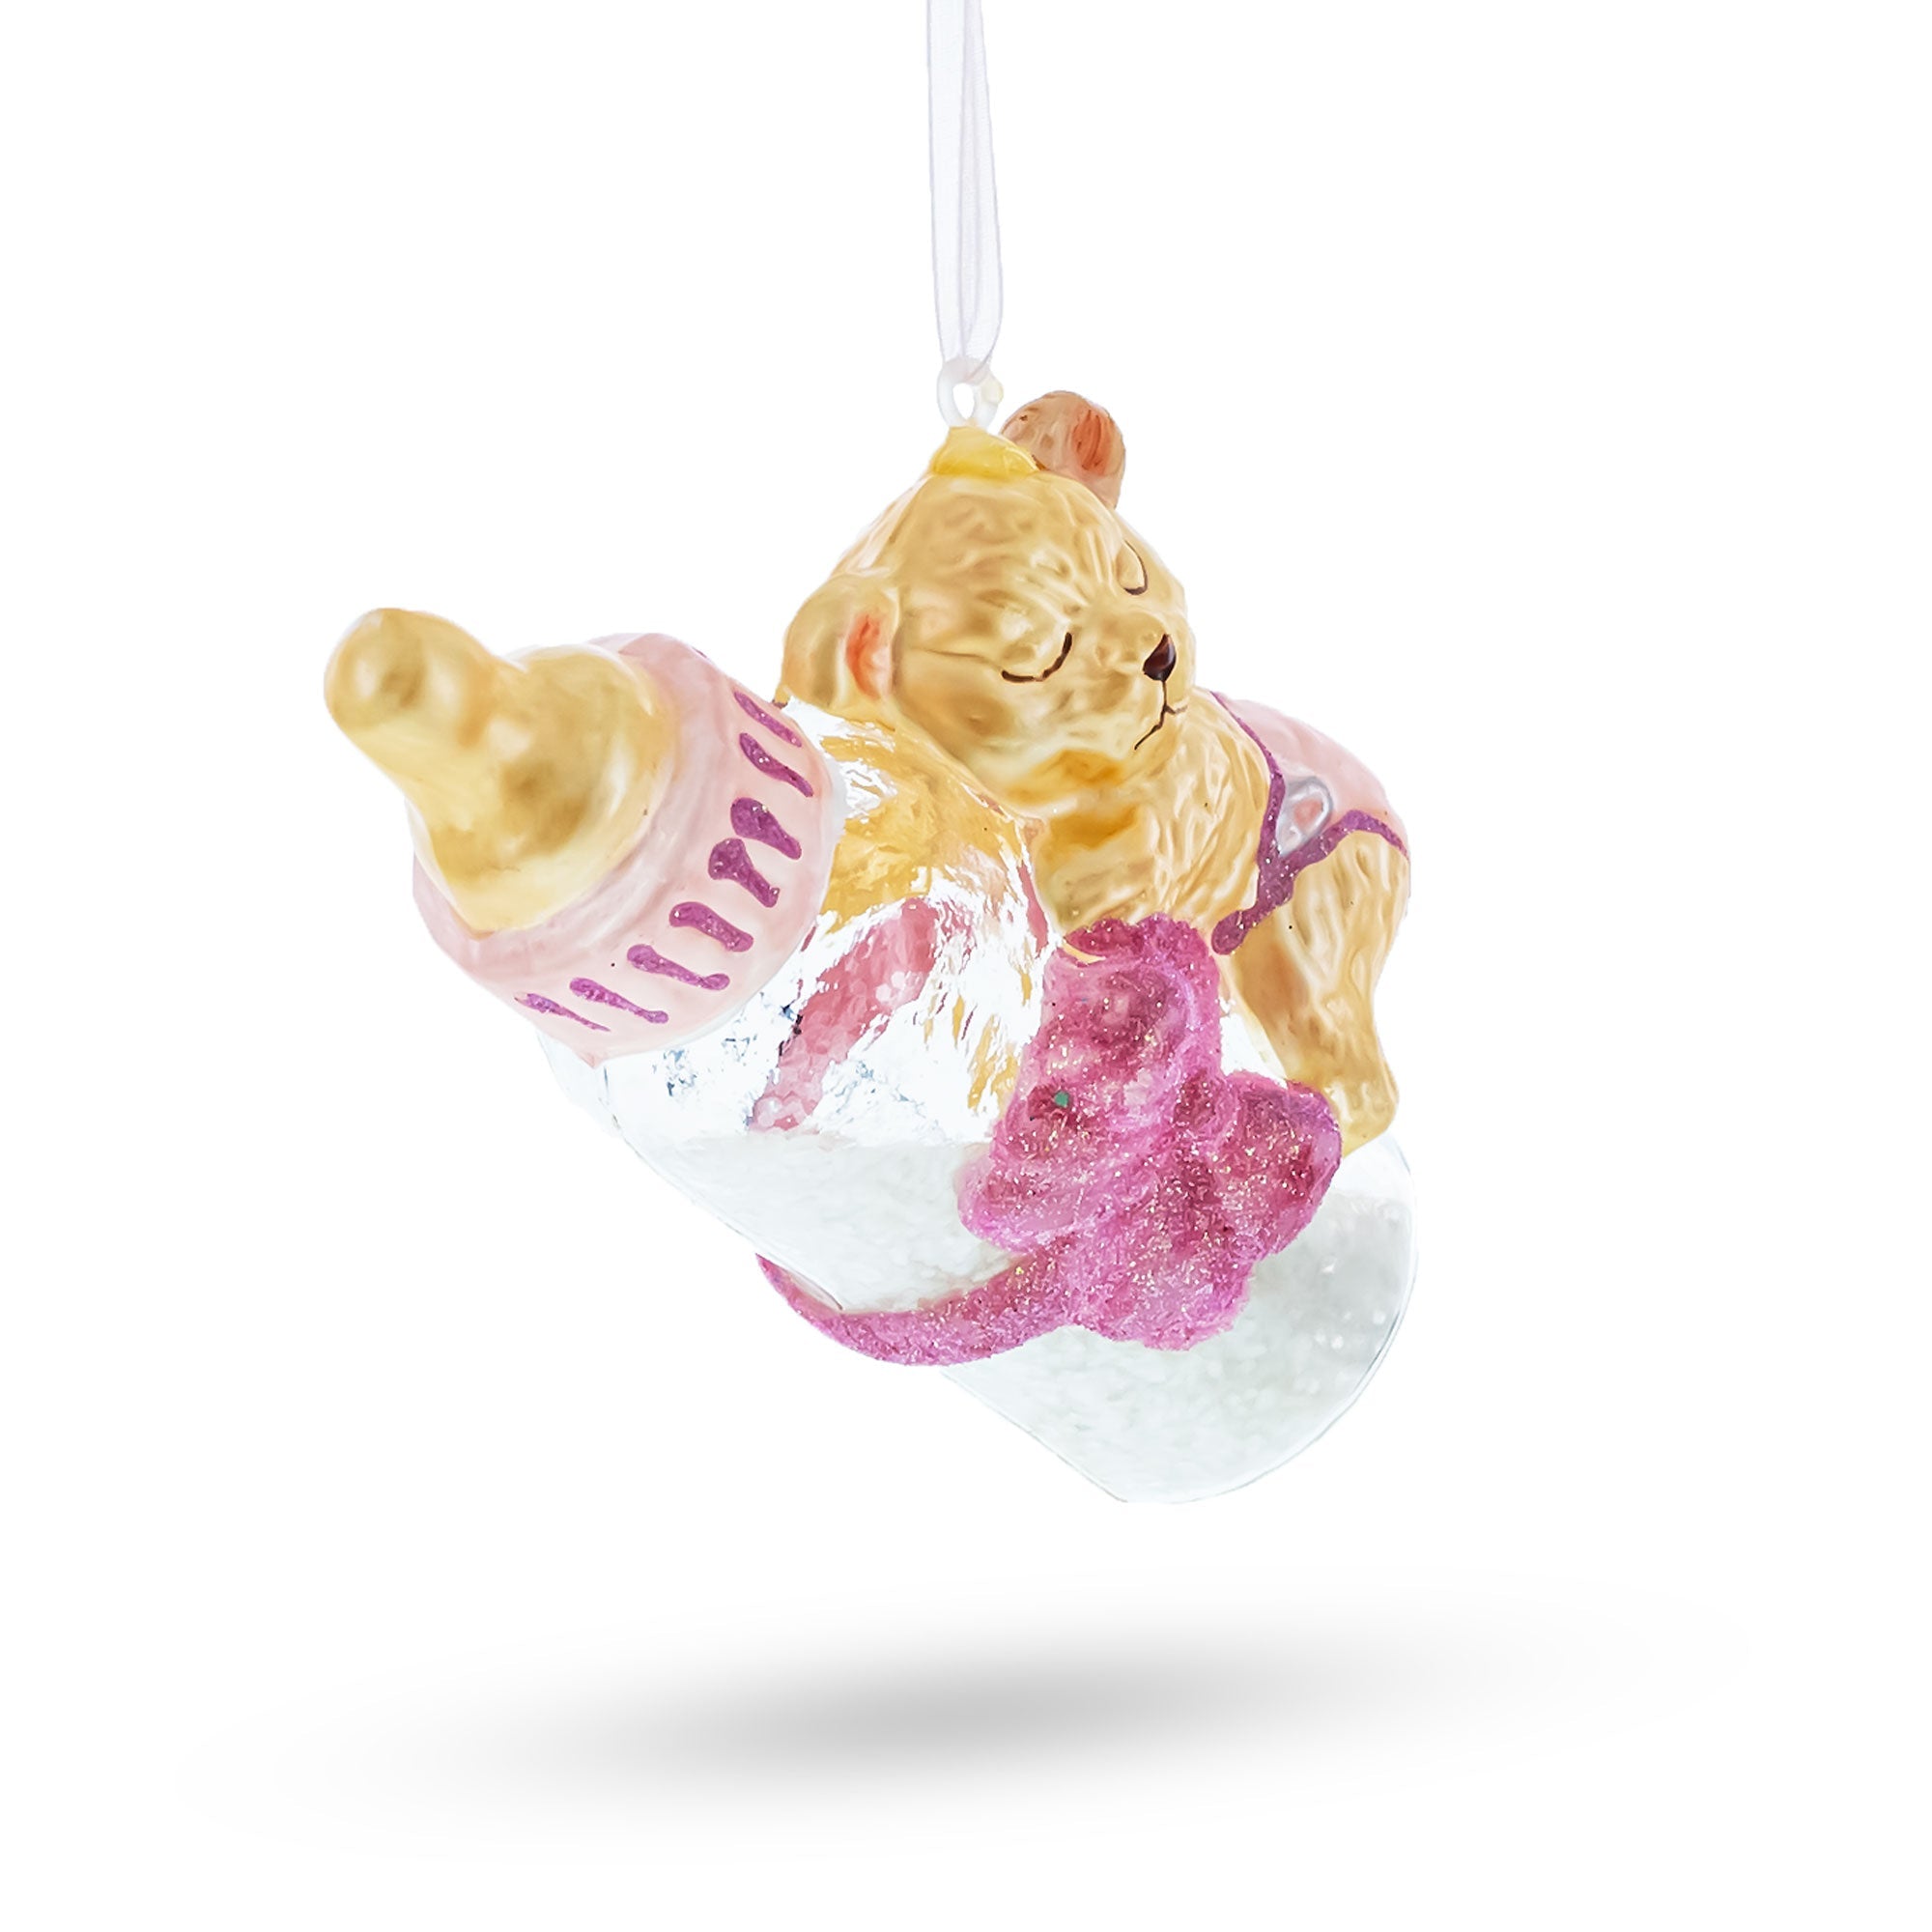 Sleeping Teddy Bear On Pink Glass Bottle - Baby's First - Delicate Blown Glass Christmas Ornament